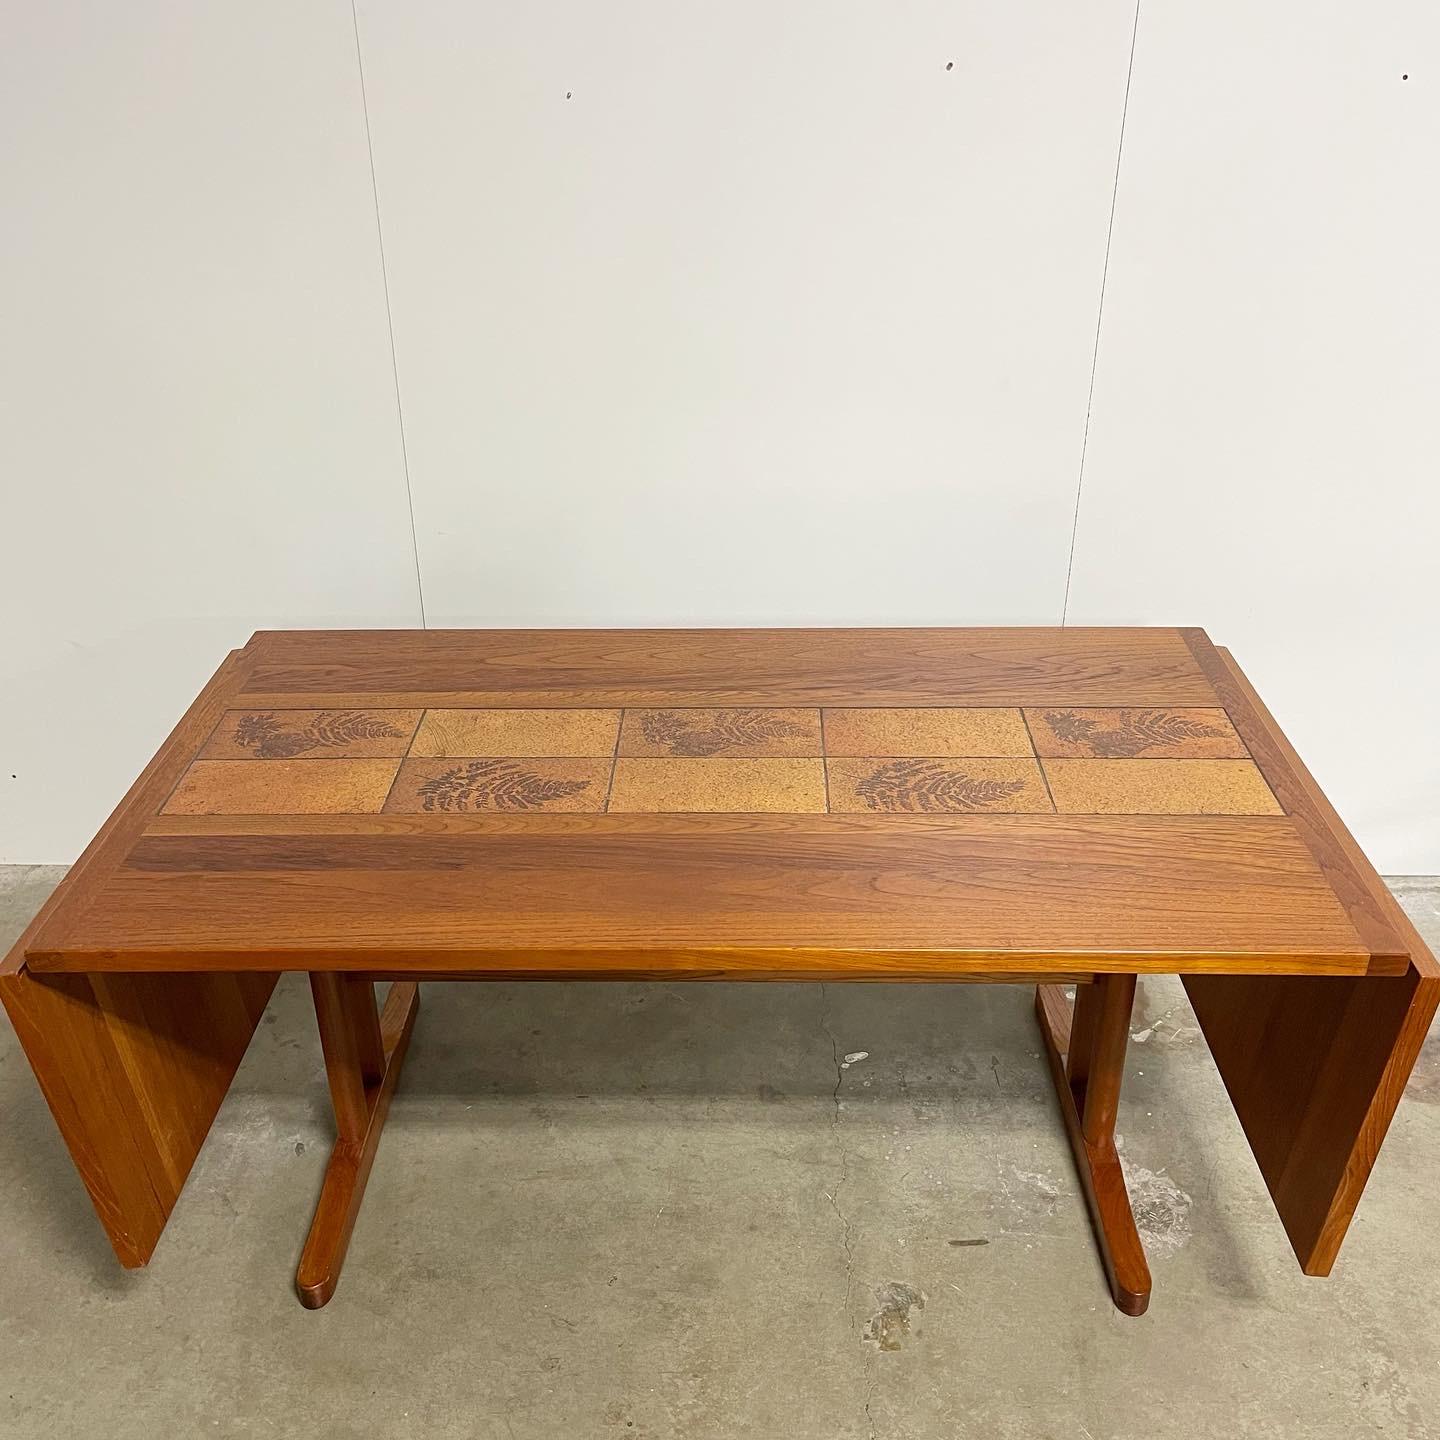 Mid century table set! Chairs by Jorgen Henrik Møller. Table by Gangsø Møbler. All teak. This set is gorgeous! Teak table that offers hanging leaves on either side. Easily removable for placing chairs at the end. The leaves hang on brass hooks. Tile